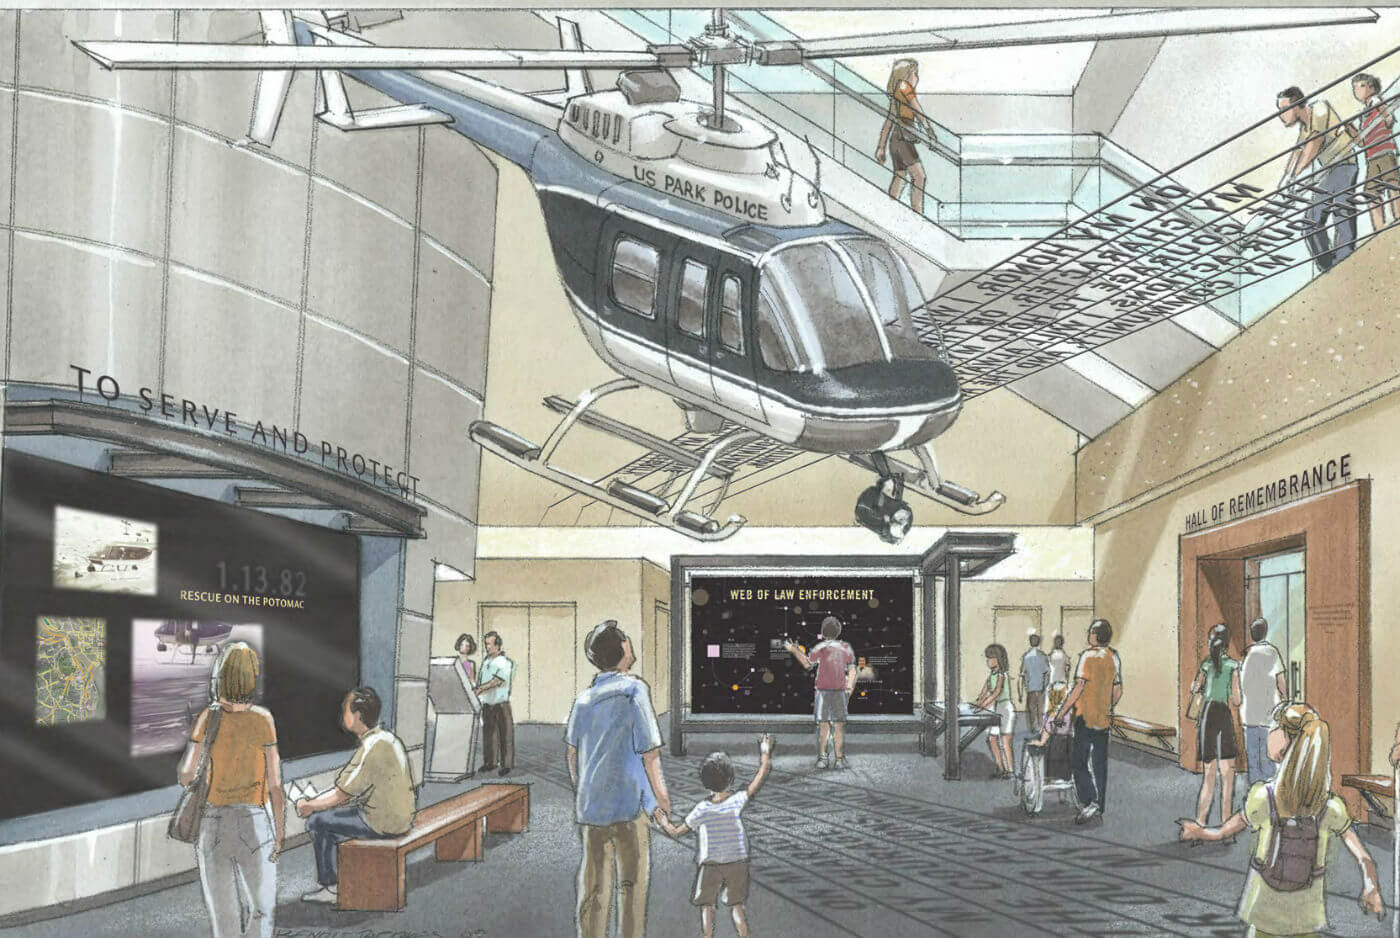 More than 35 years later, the National Law Enforcement Museum was able to bring Eagle One back to Washington, after a restoration at Arrow Aviation’s facility in Broussard, Louisiana. Rendering courtesy of Arrow Aviation